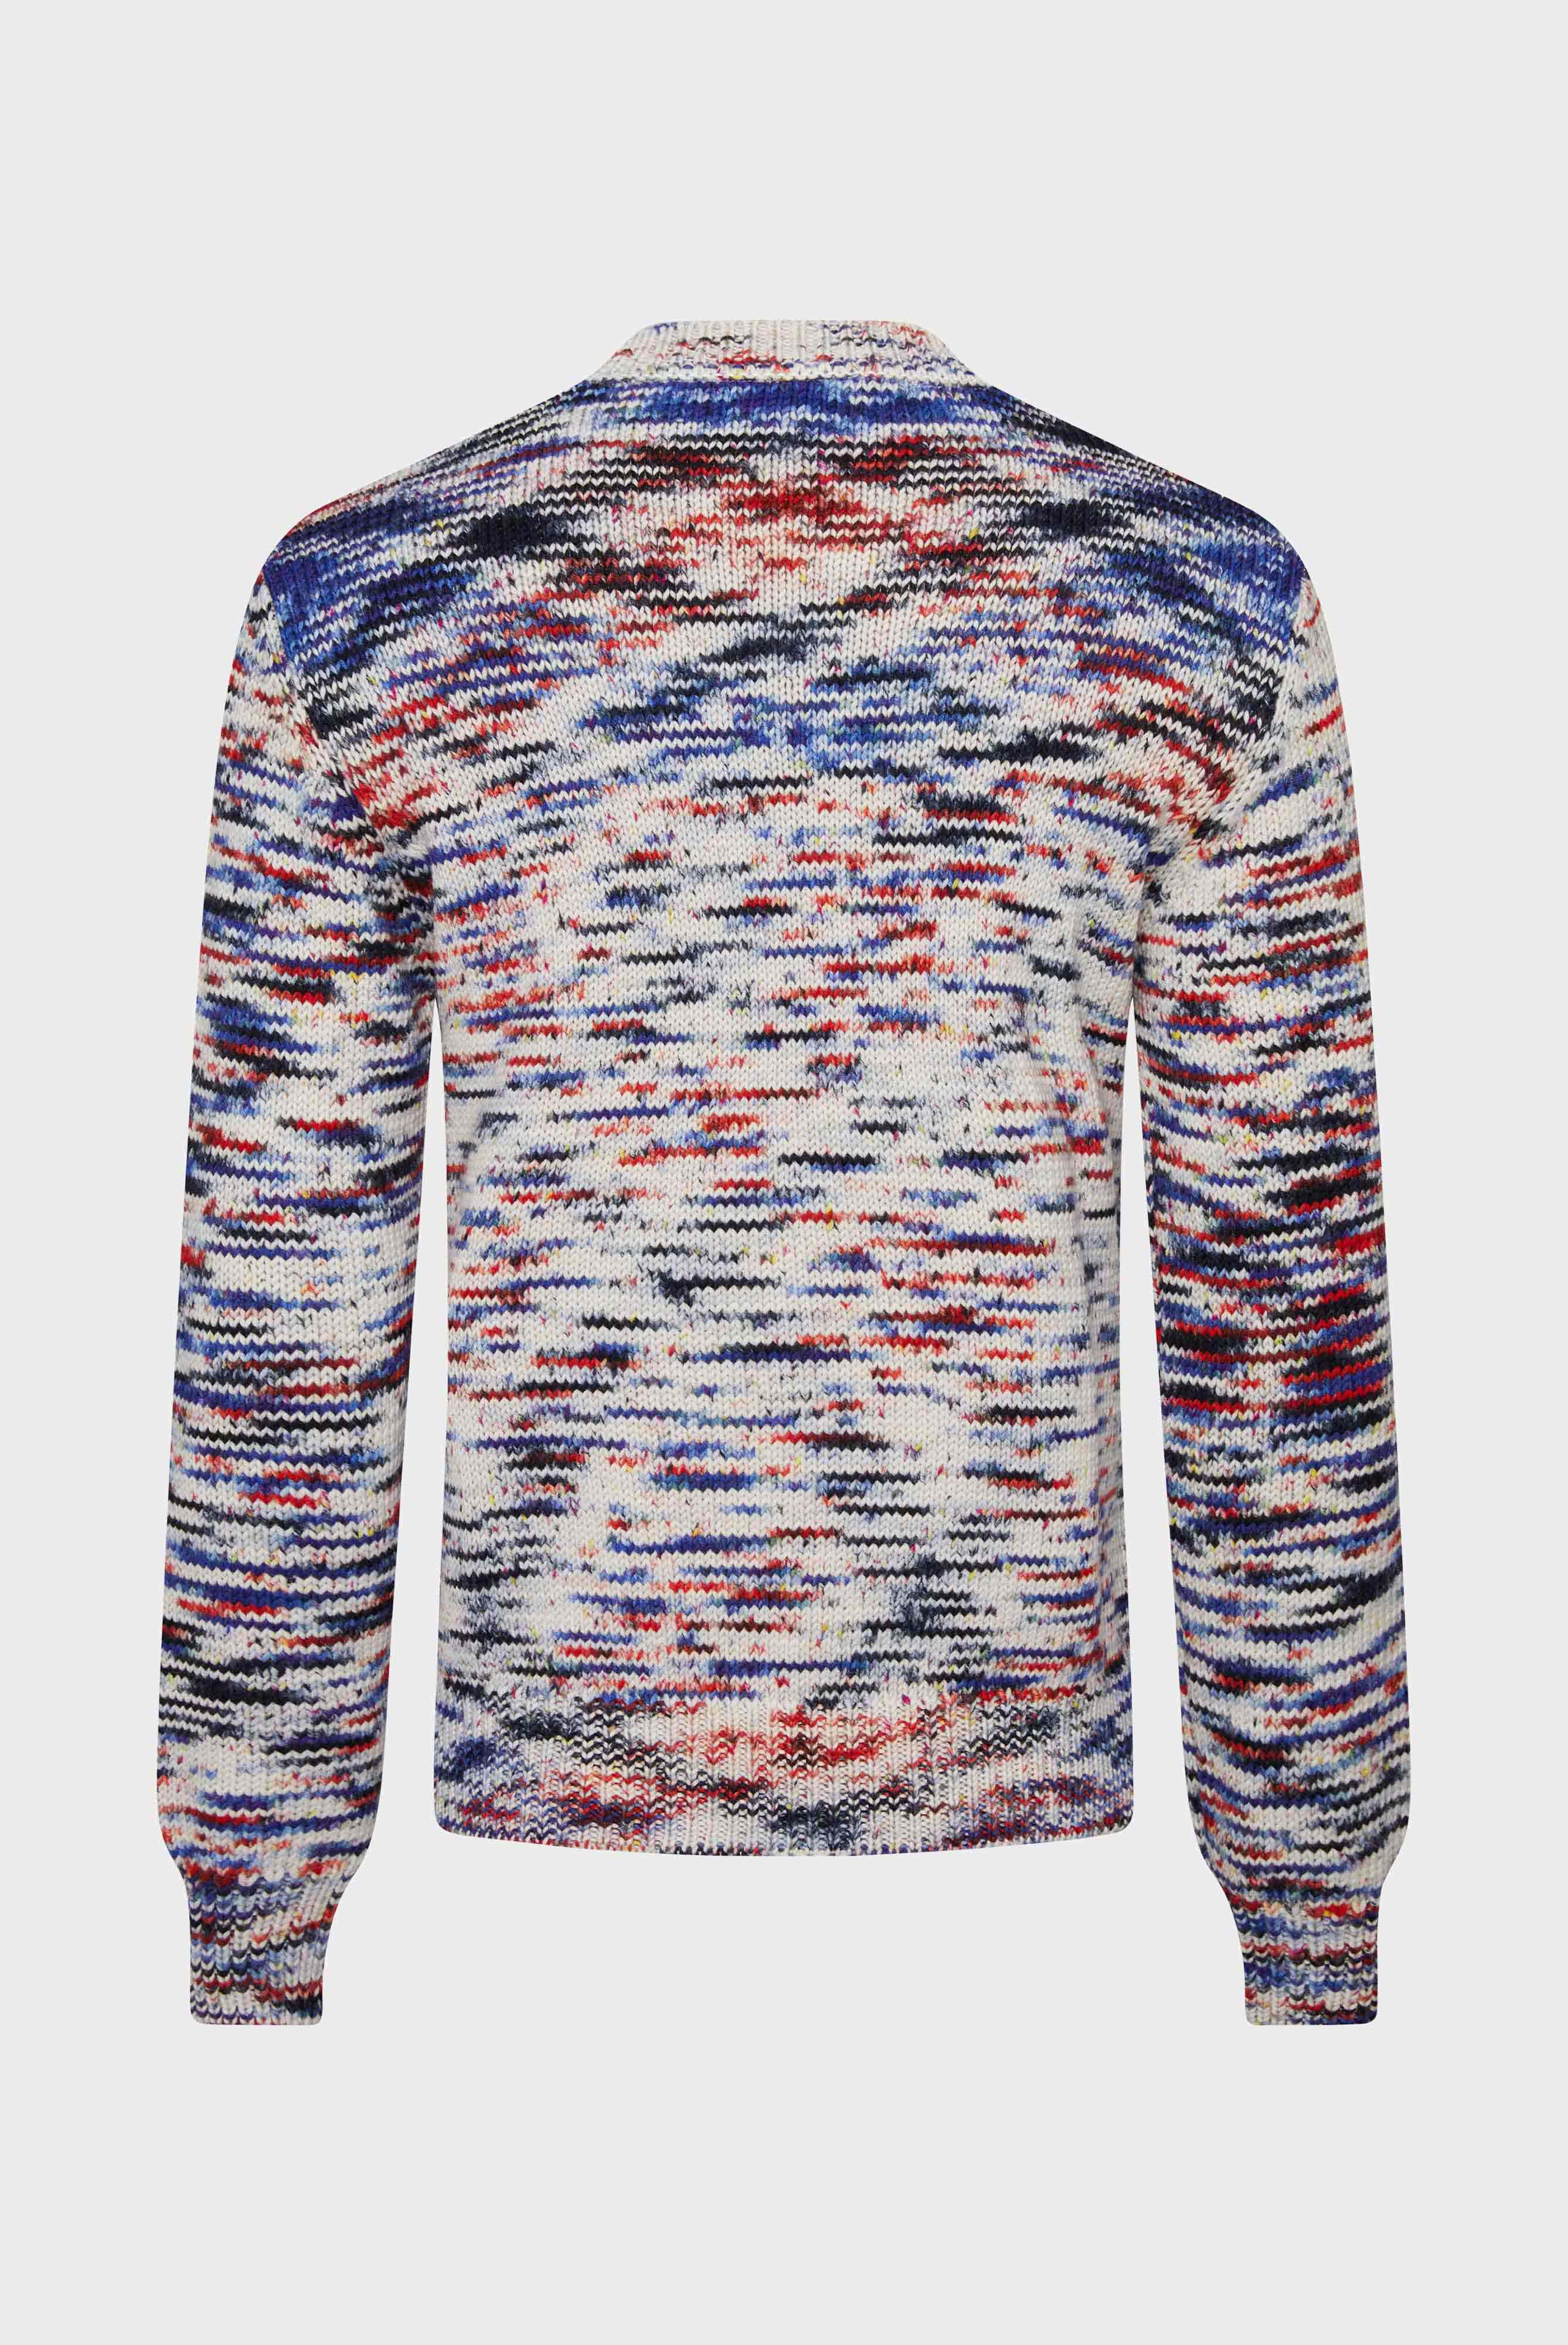 Sweaters & Cardigans+Merino Crewneck Space Dyed+82.8630..S00243.925.L